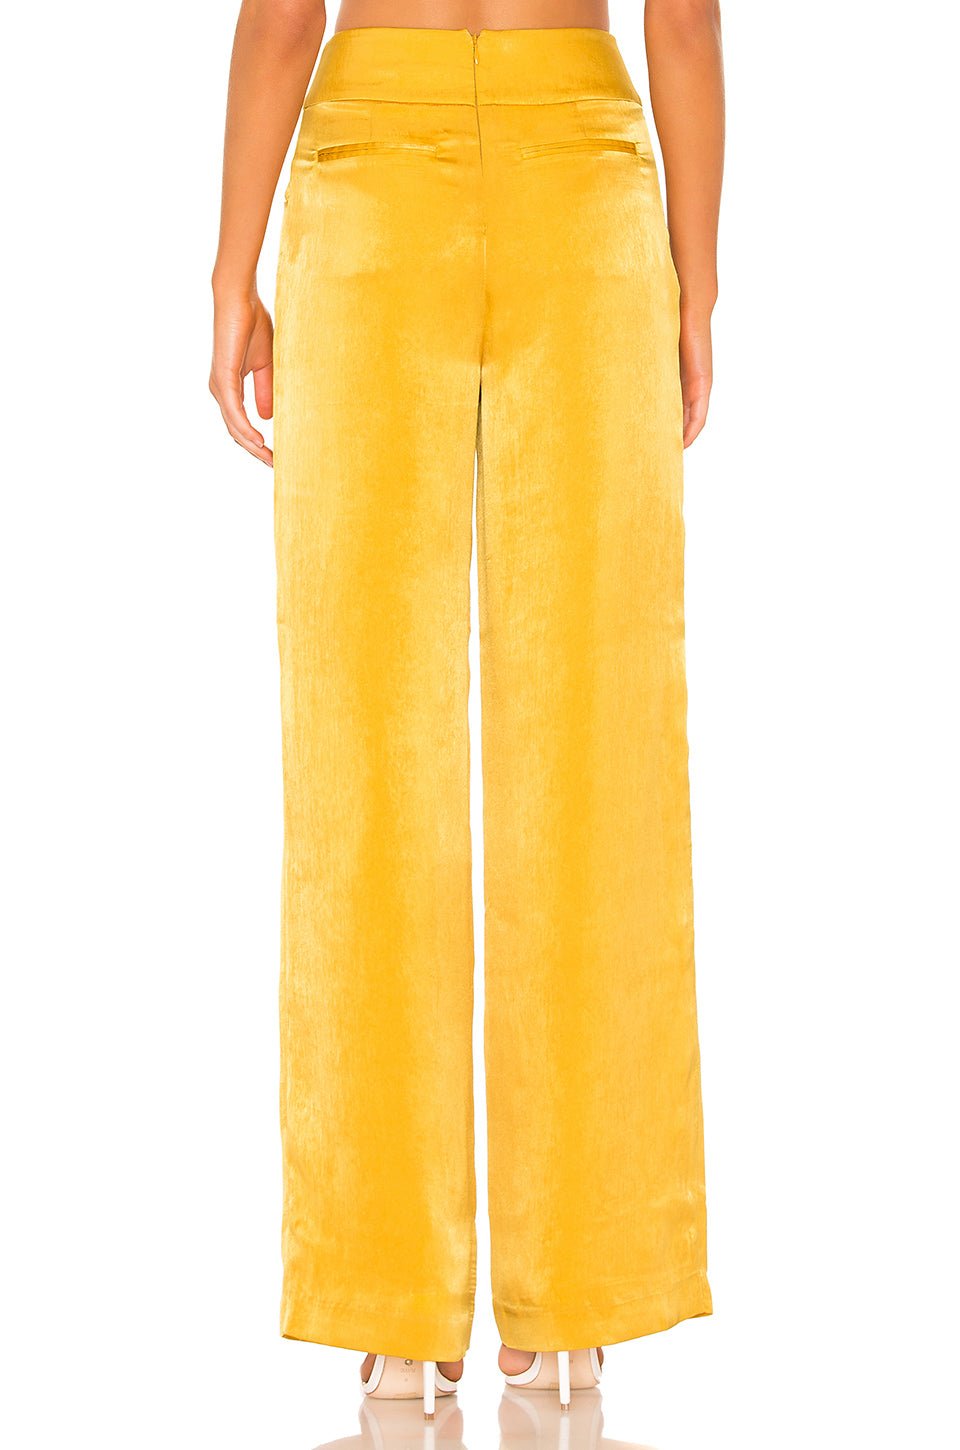 Andre Pants in YELLOW